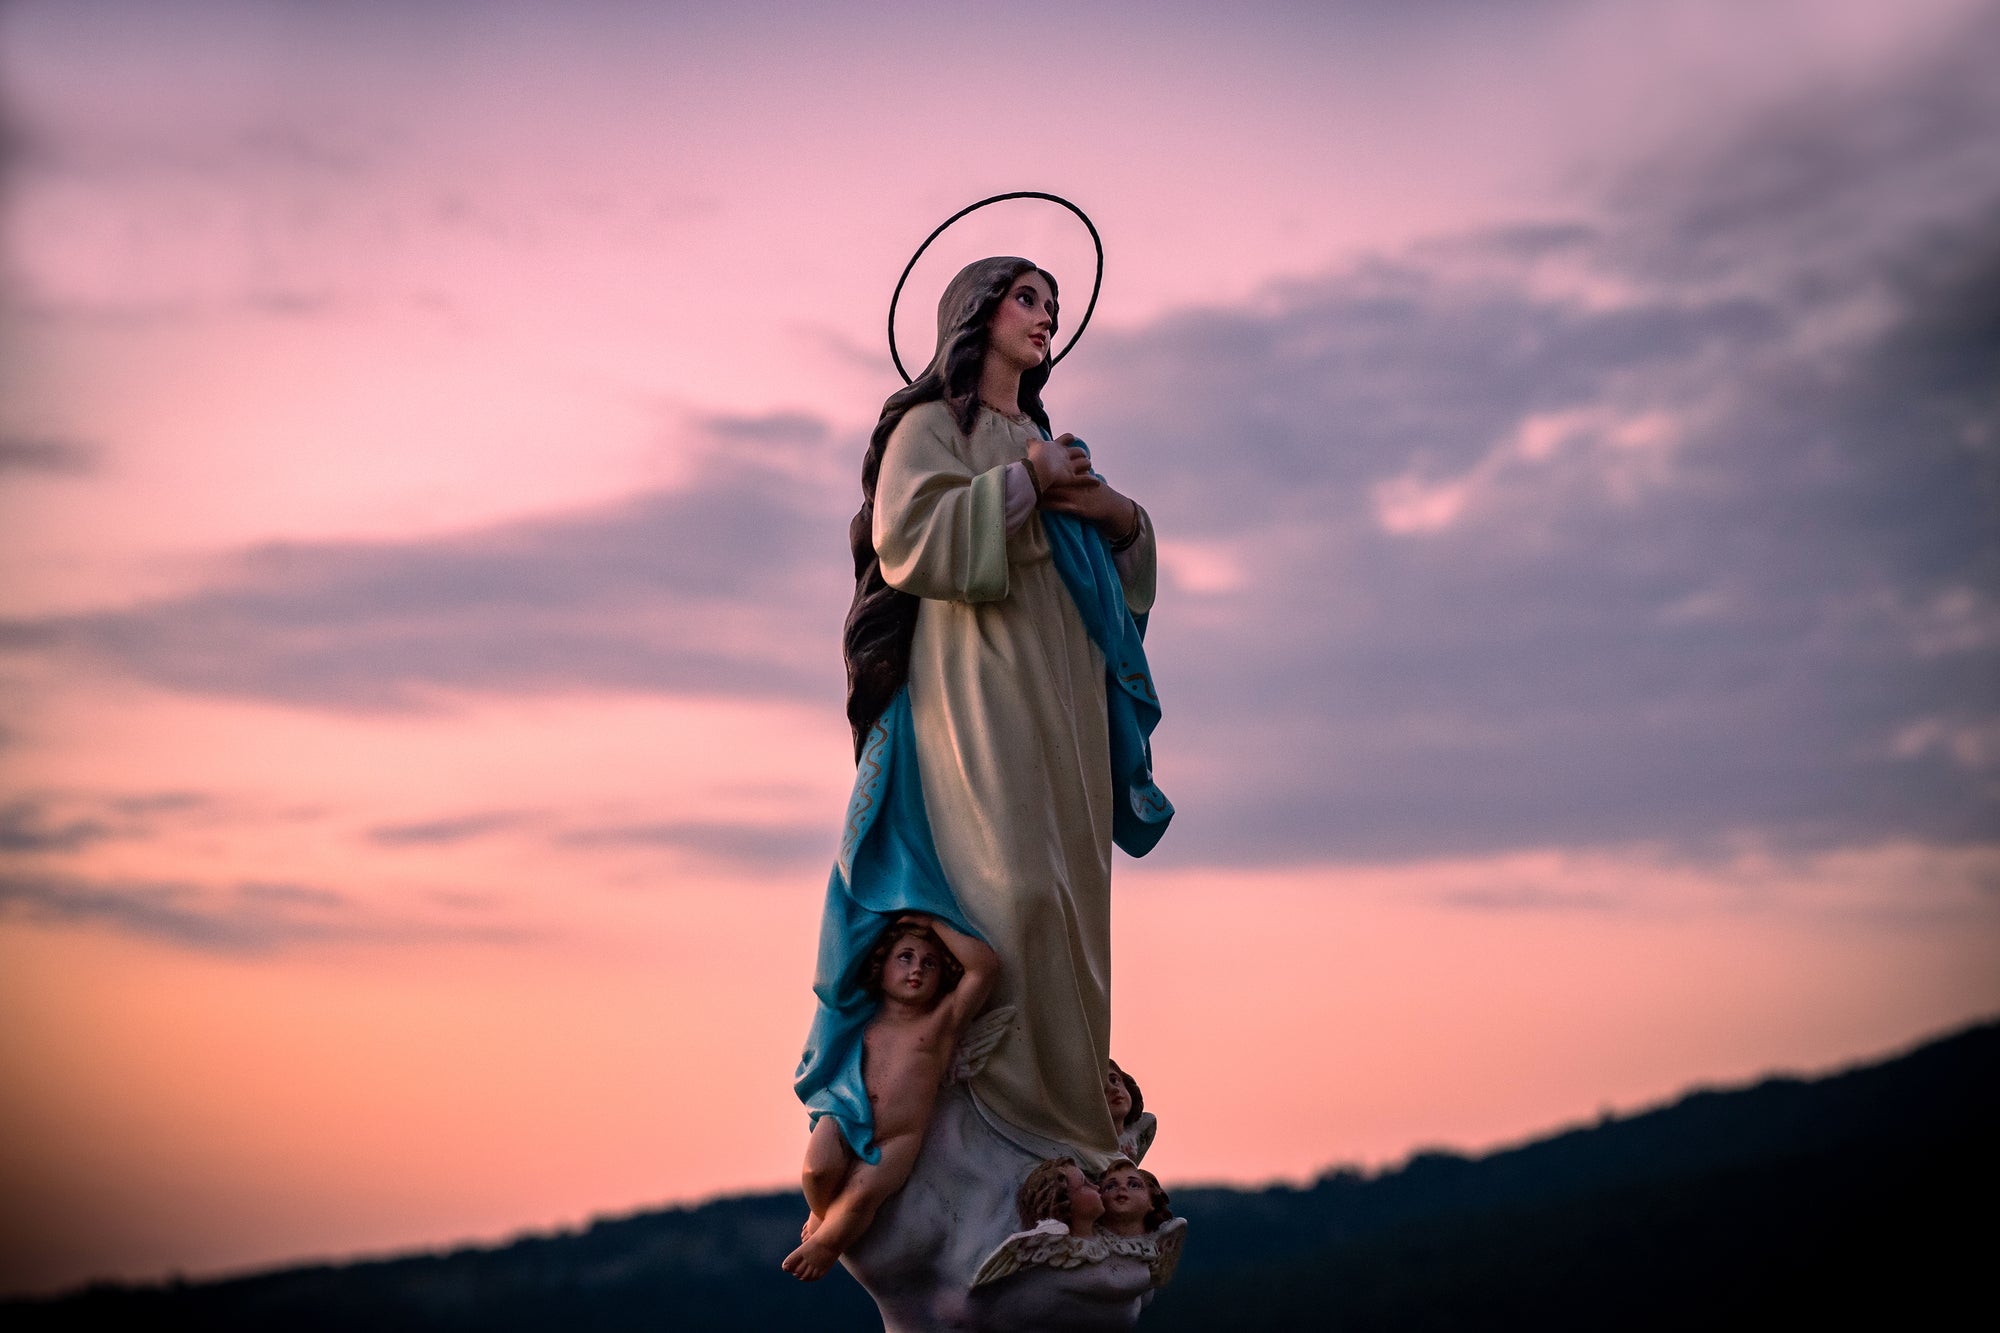 Look to the star, call upon Mary!